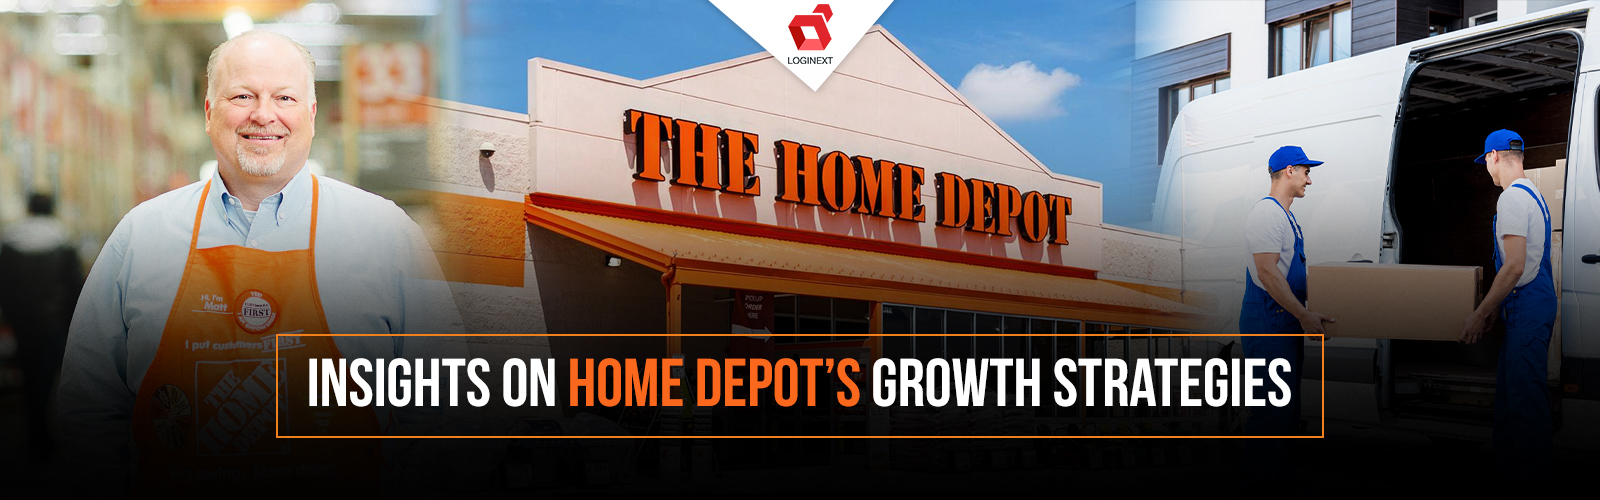 Insights on Home Depot’s growth strategies with CEO, Ted Decker